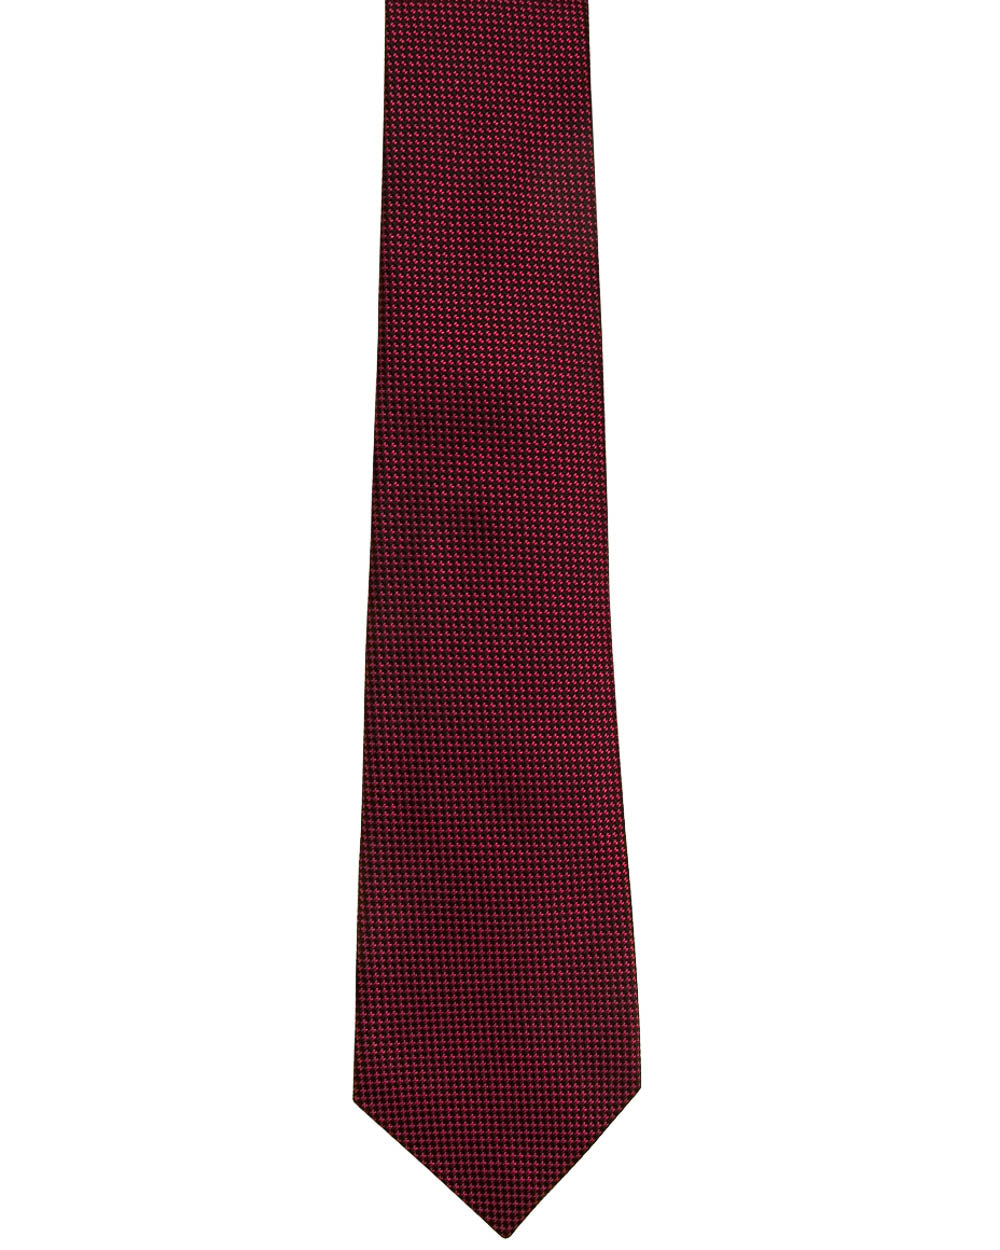 Bordeaux and Black Textured Woven Tie